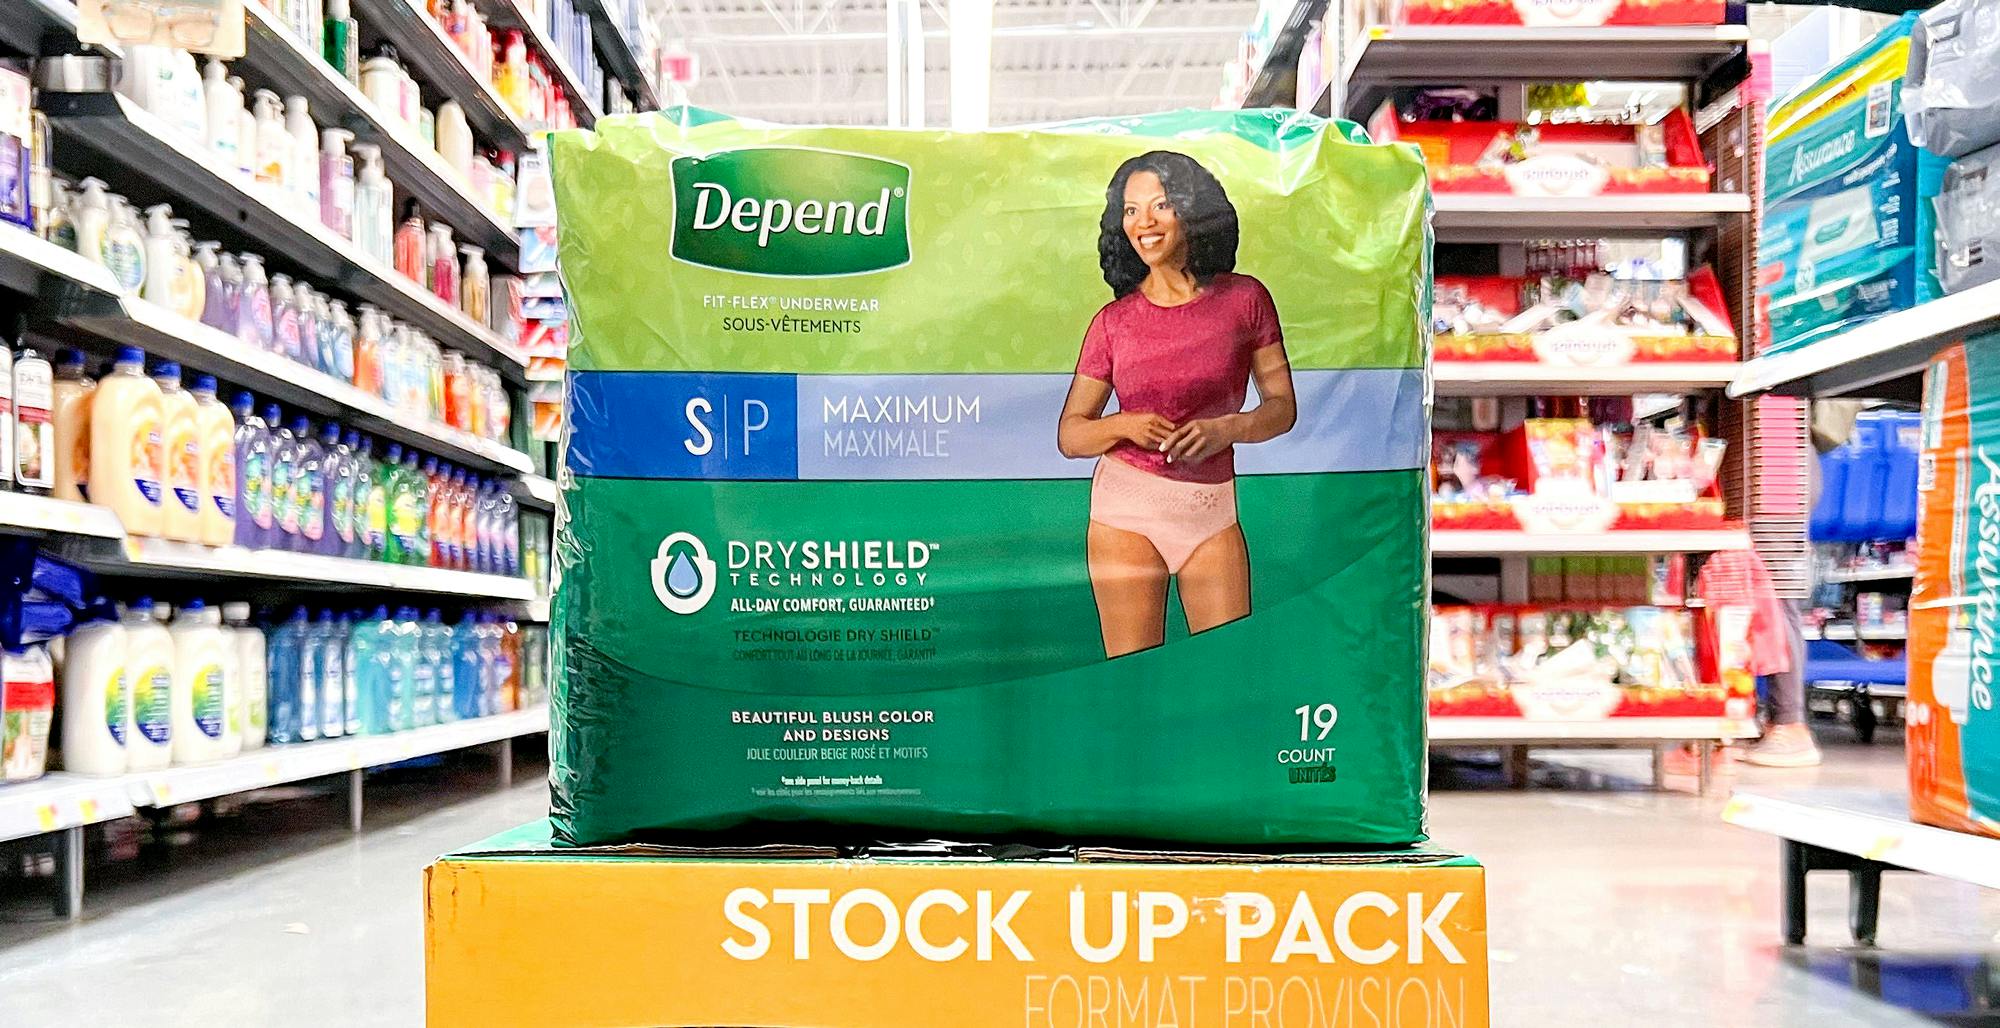 How to Save on Depend Products - The Krazy Coupon Lady